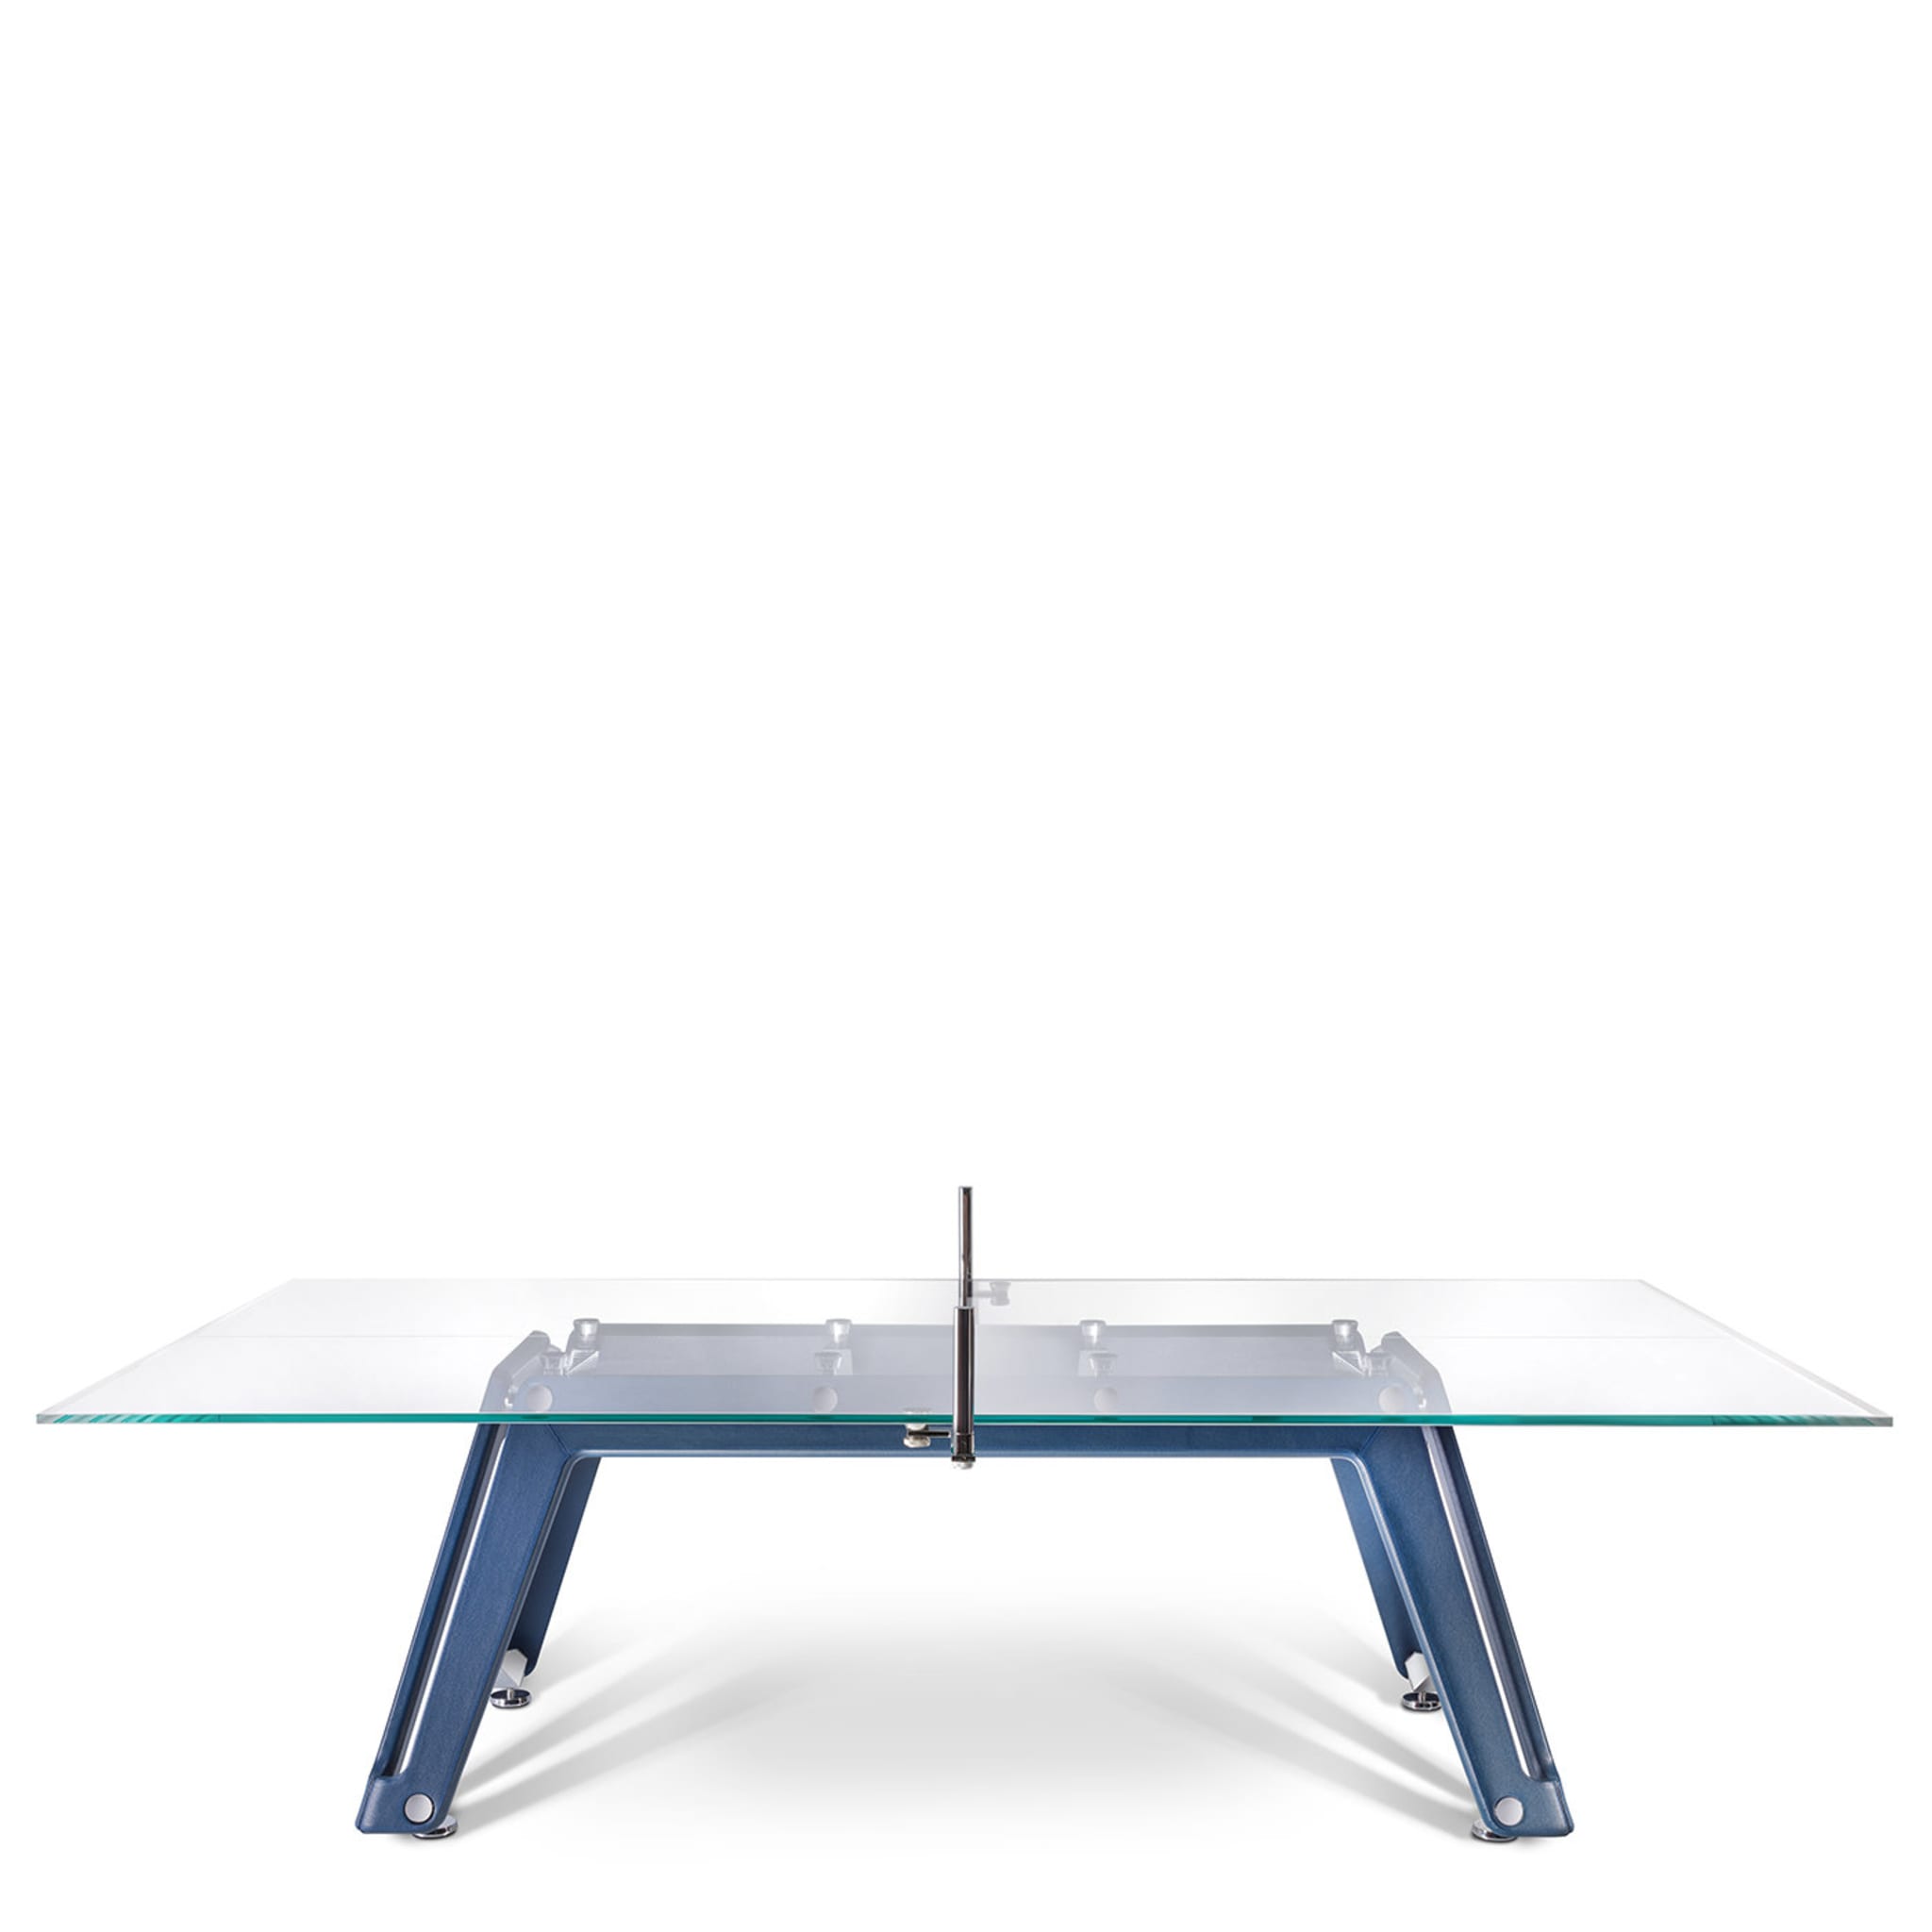 Lungolinea Glass Table Tennis Table by Adriano Design - Alternative view 2